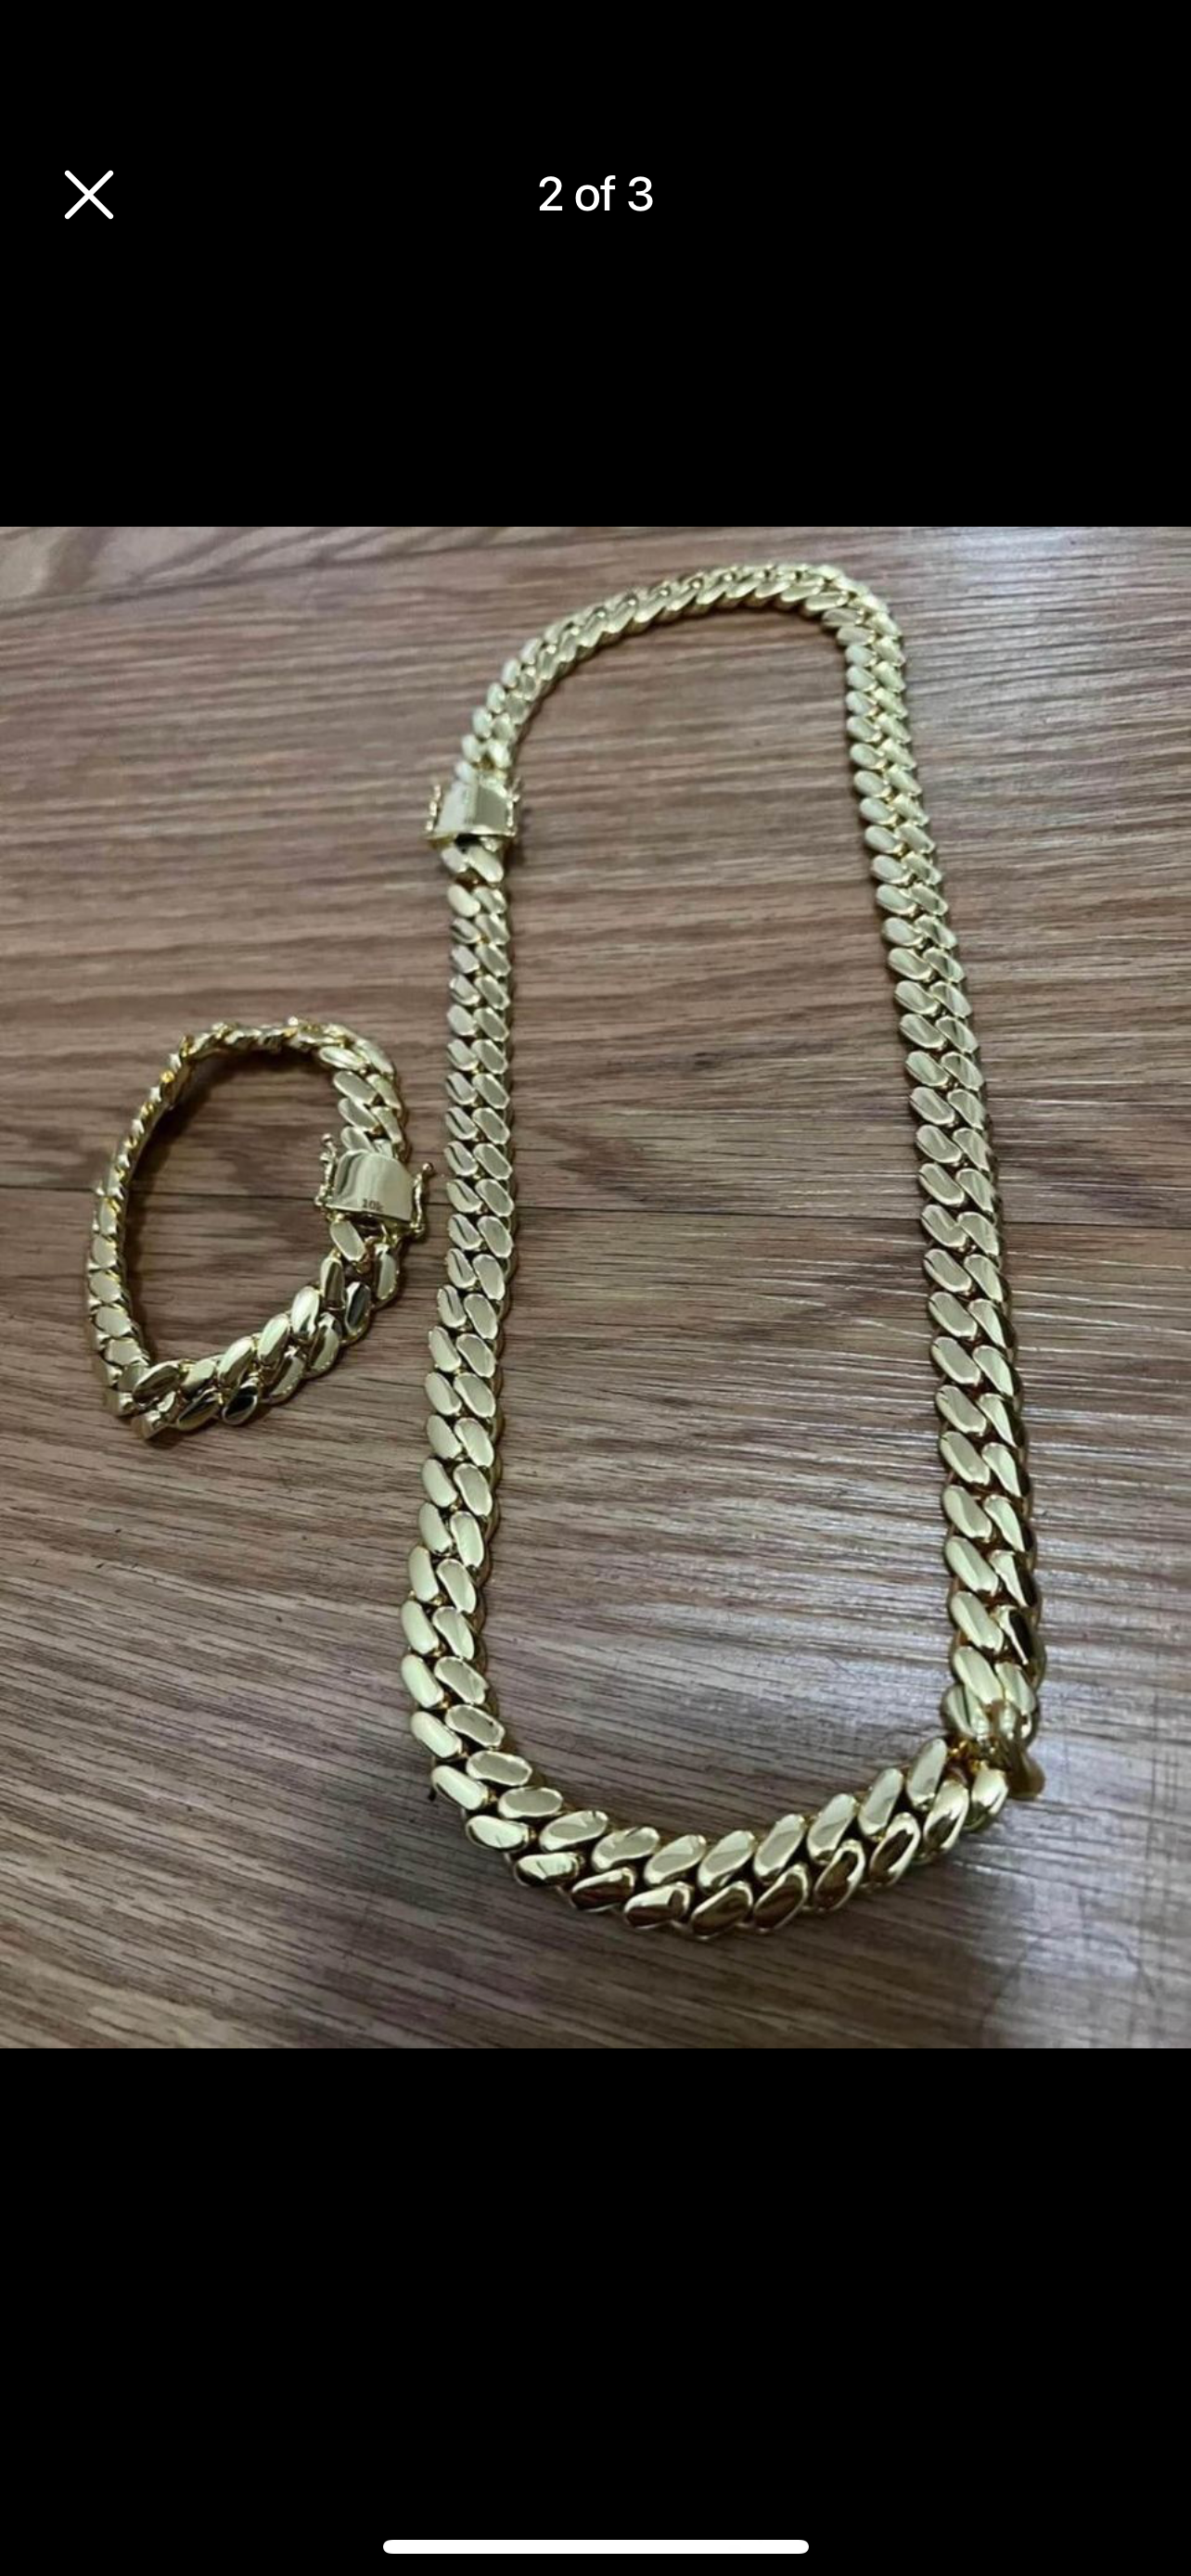 chain and bracelet set Gold bonded high quality